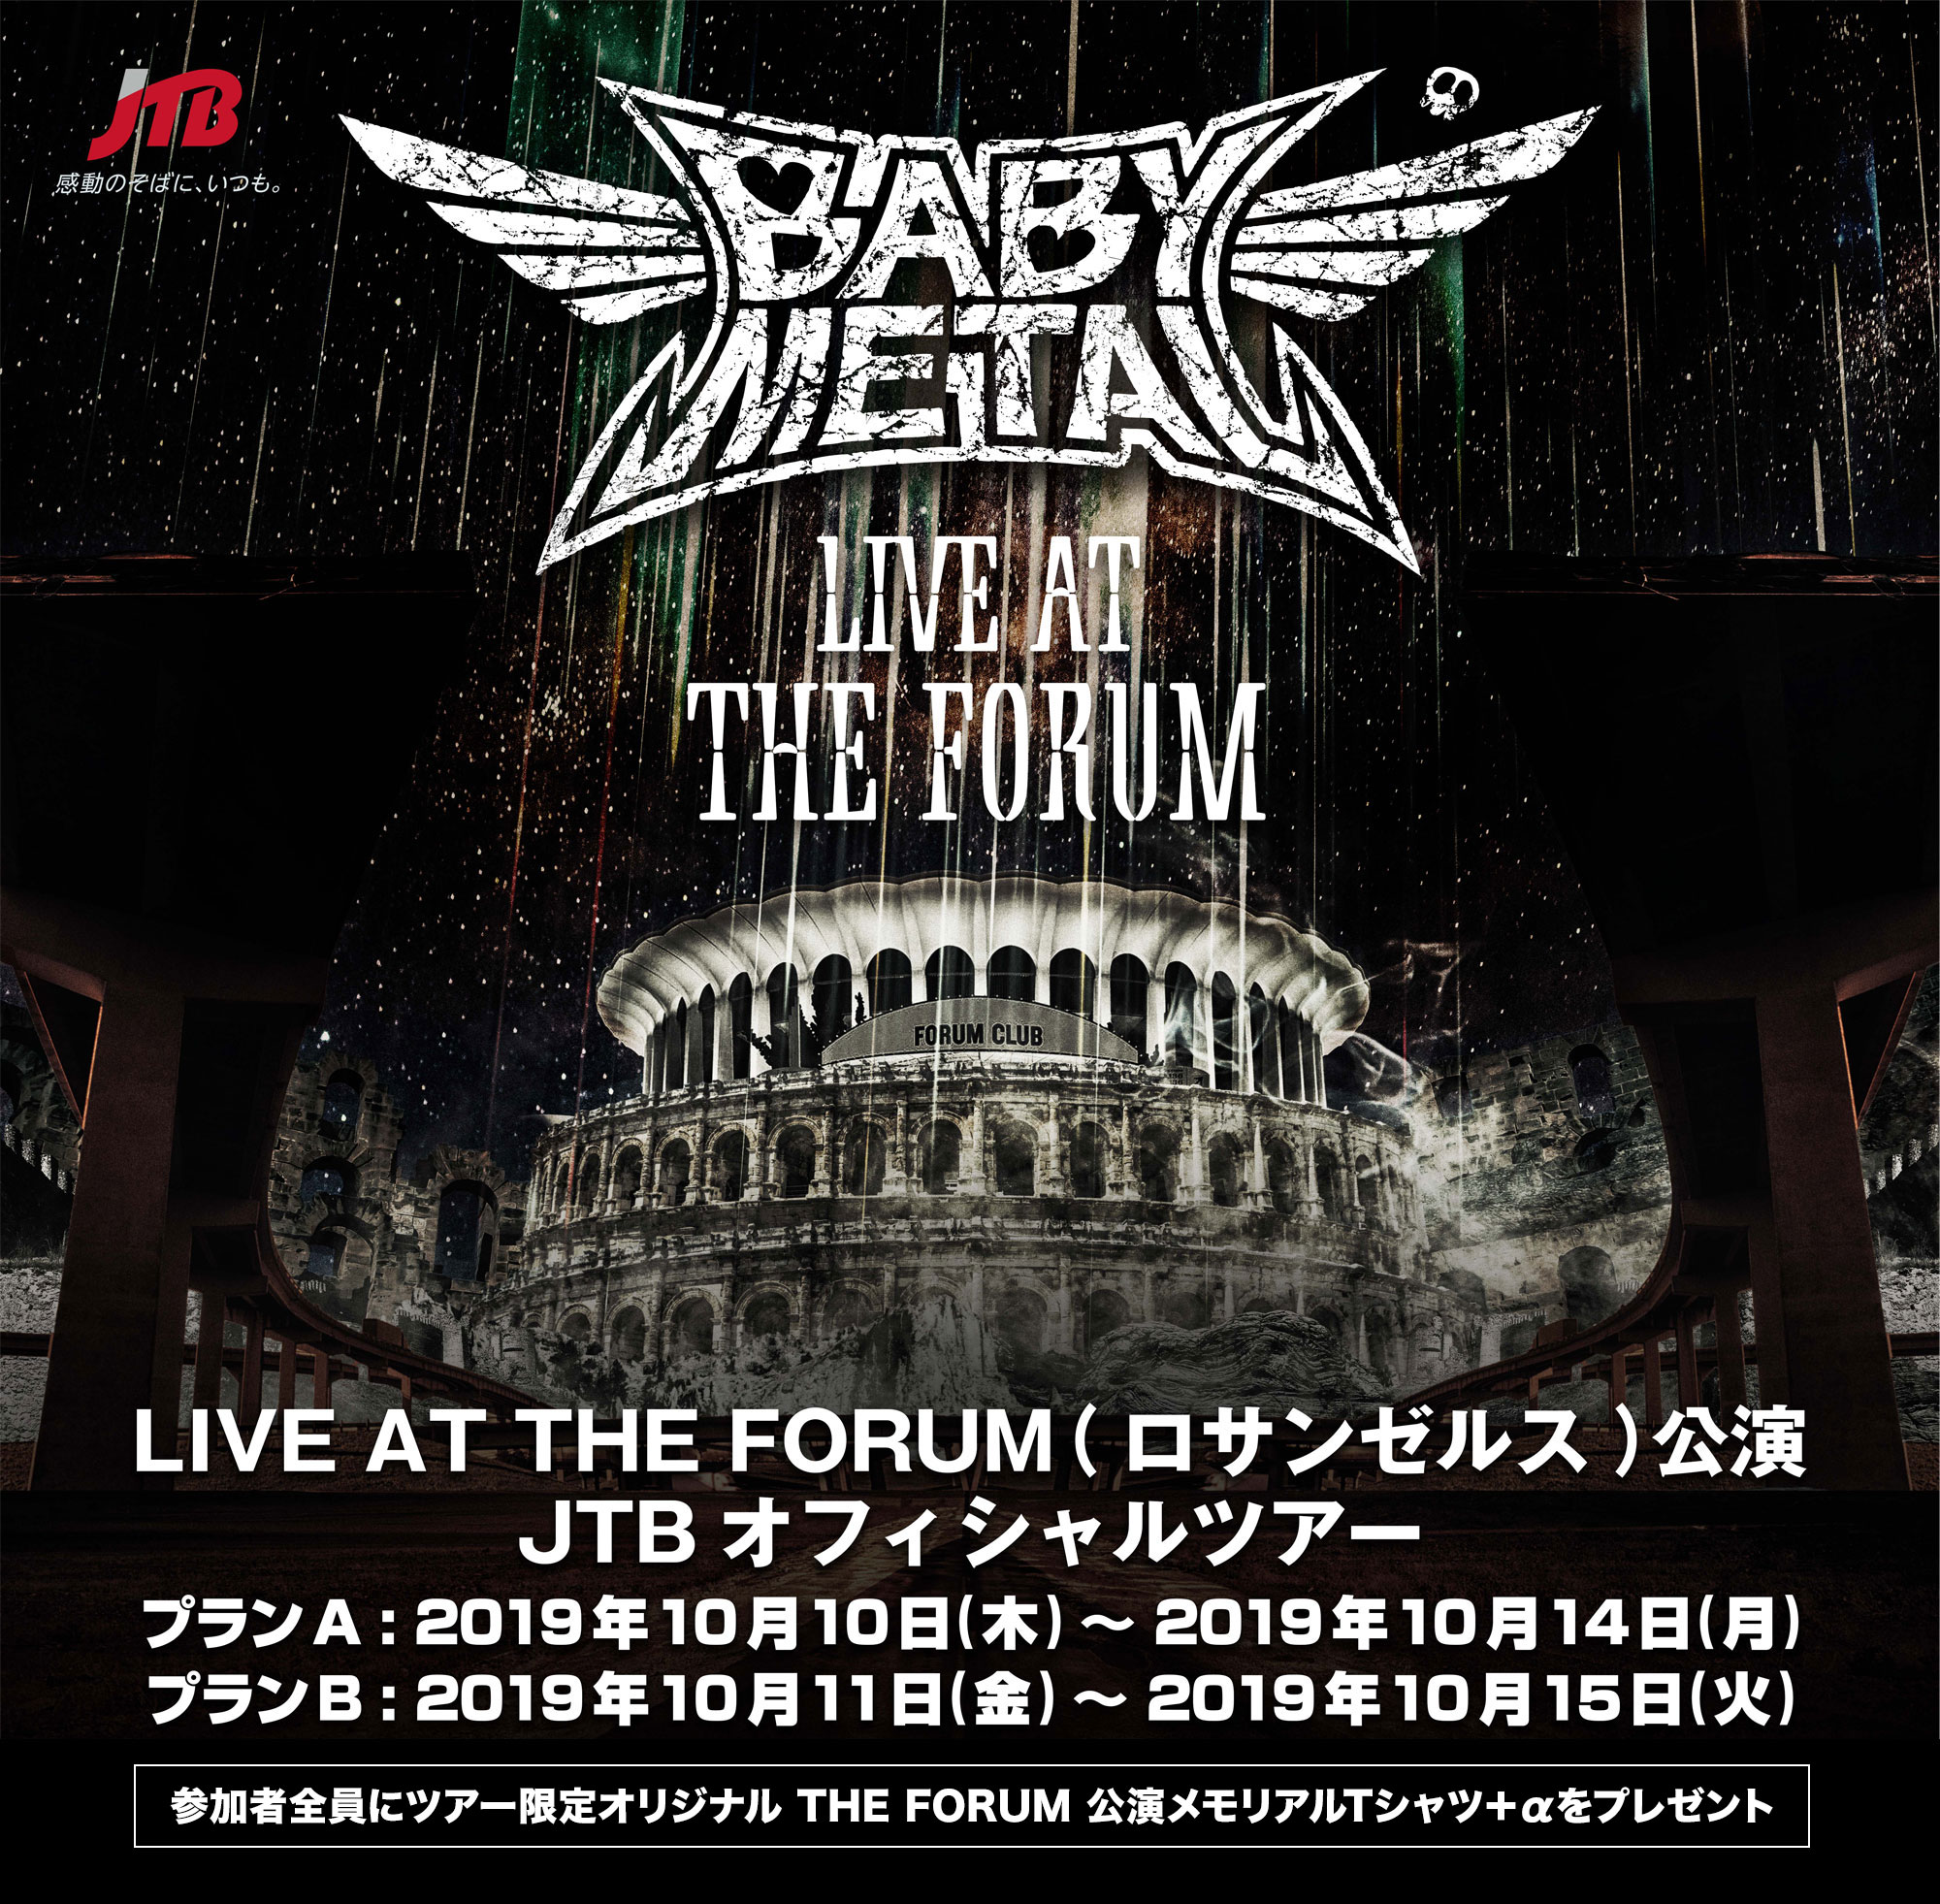 BABYMETAL LIVE AT THE FORUM THE ONE限定